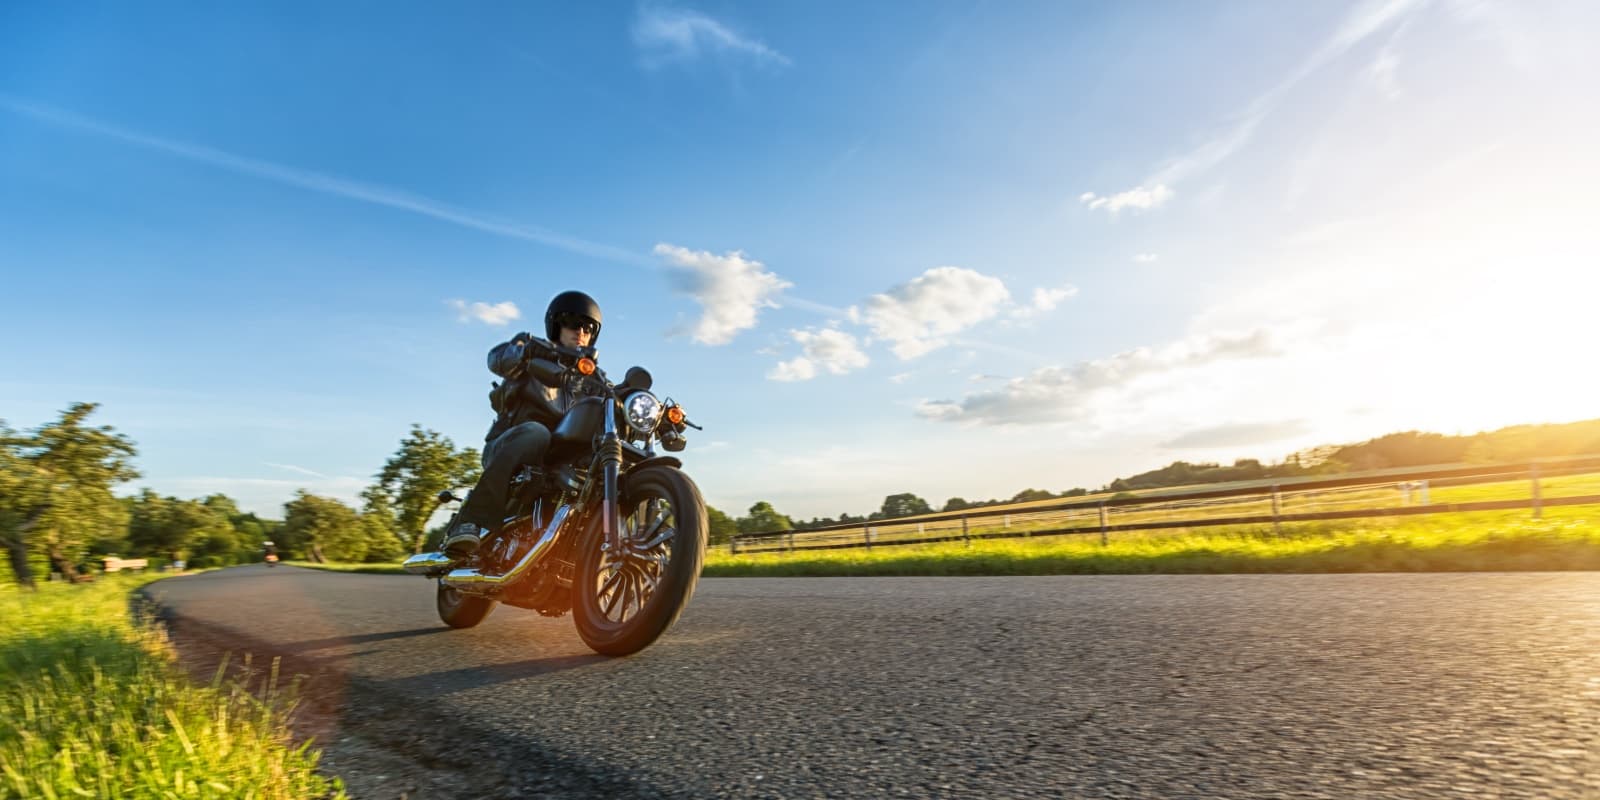 What Does Motorcycle Insurance Cover? - JMG Insurance Agency